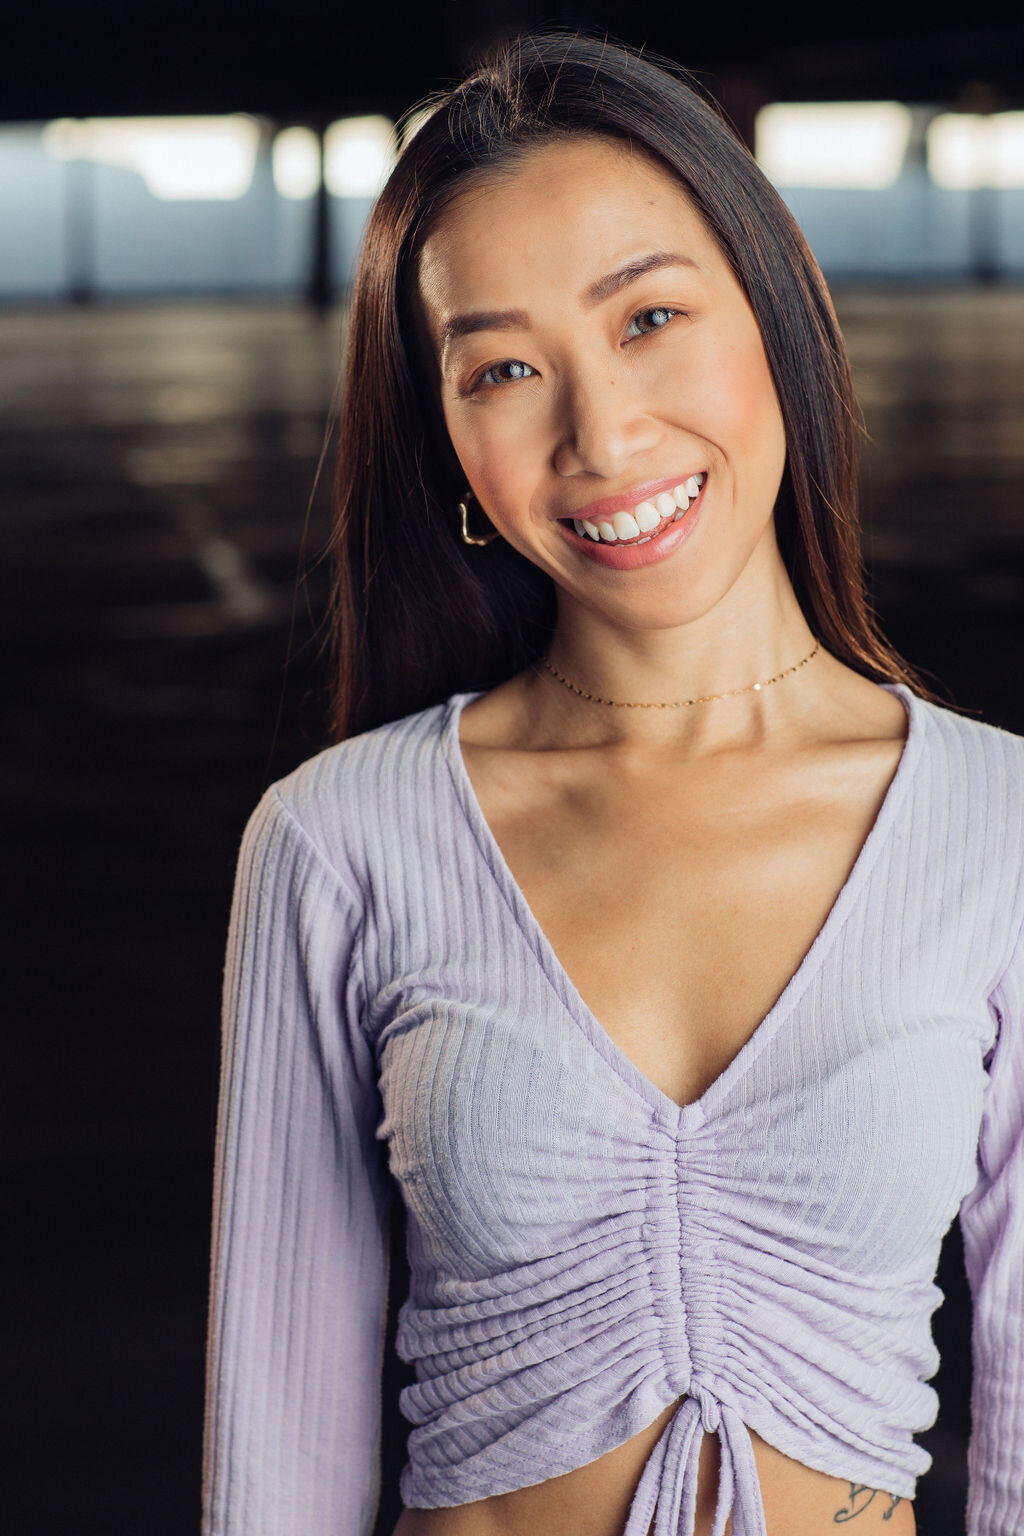 Headshot Photograph Of Young Woman In Lavender Crop Top Los Angeles